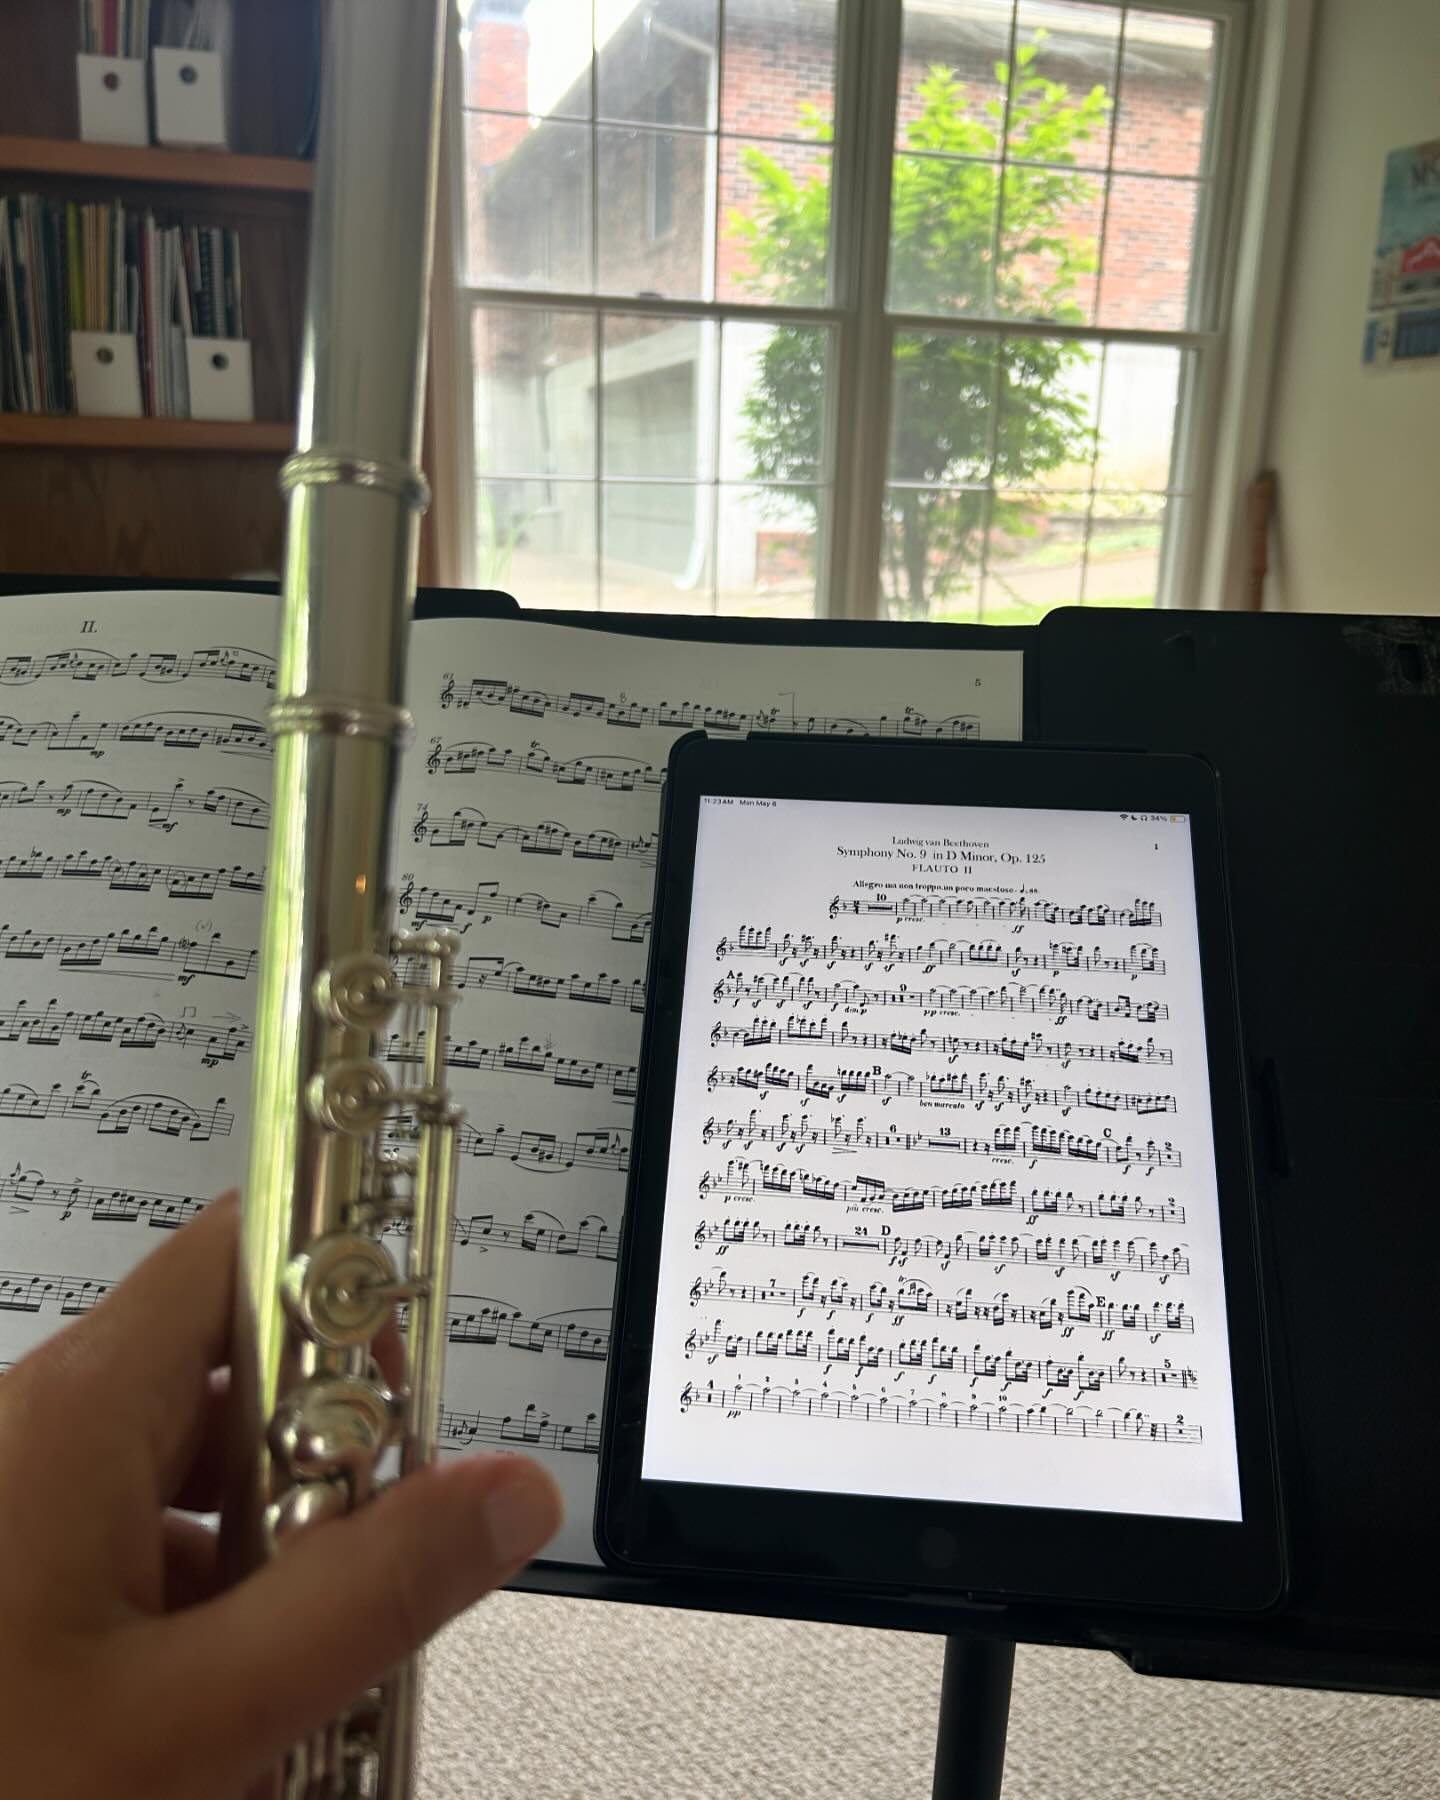 Monday&rsquo;s view vs. Friday&rsquo;s view. 

No nature music today, but I am diving into a different kind of adventure&hellip; Beethoven&rsquo;s 1st and 9th Symphonies in preparation for the @mosymphony Firefly Music Festival next month. ☺️🤩🥳

Th